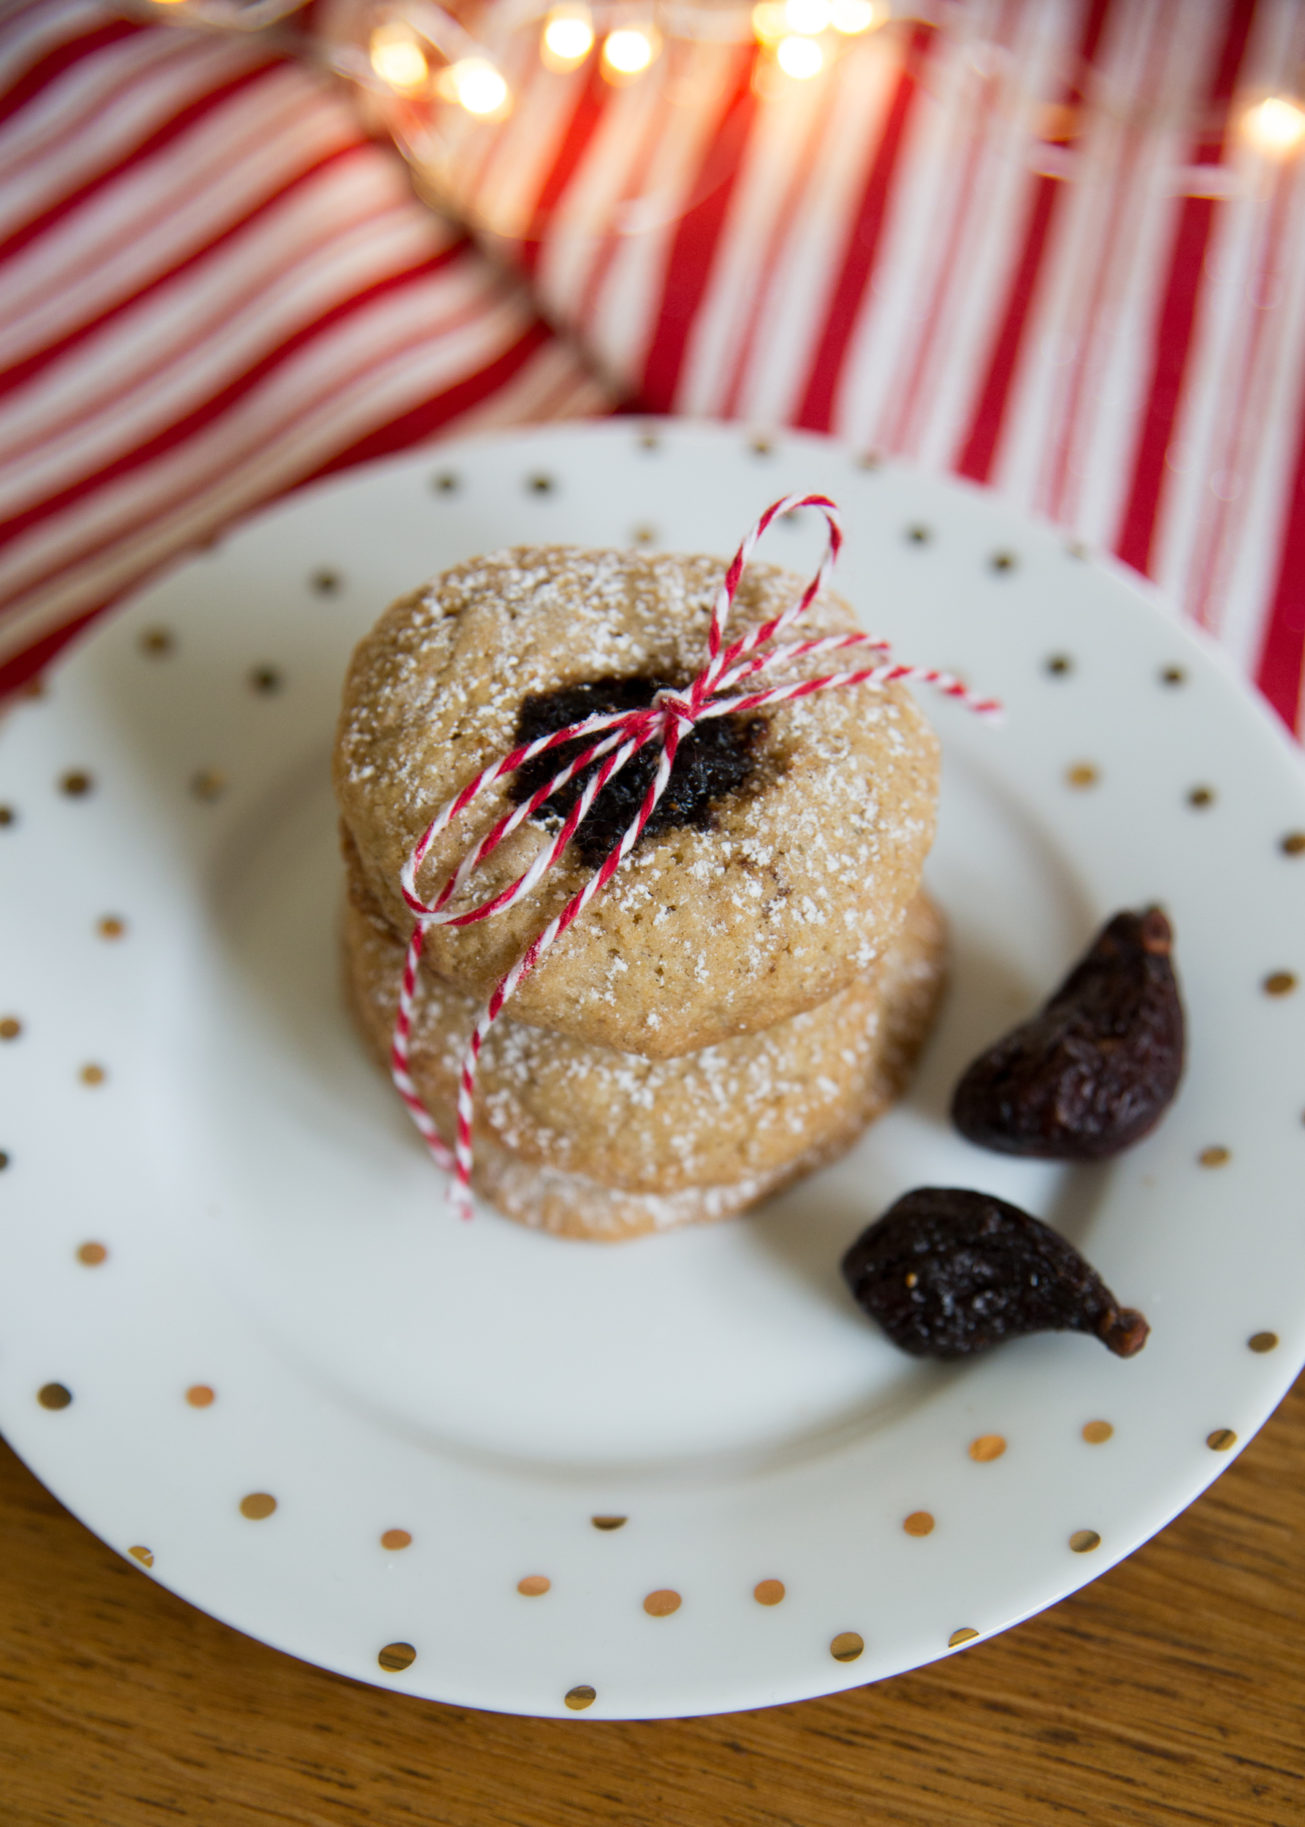 Cardamom cookies bring a cozy flavor to the holidays. The best cardamom cookies-- you'll love our fig jam thumbprint cookie recipe.